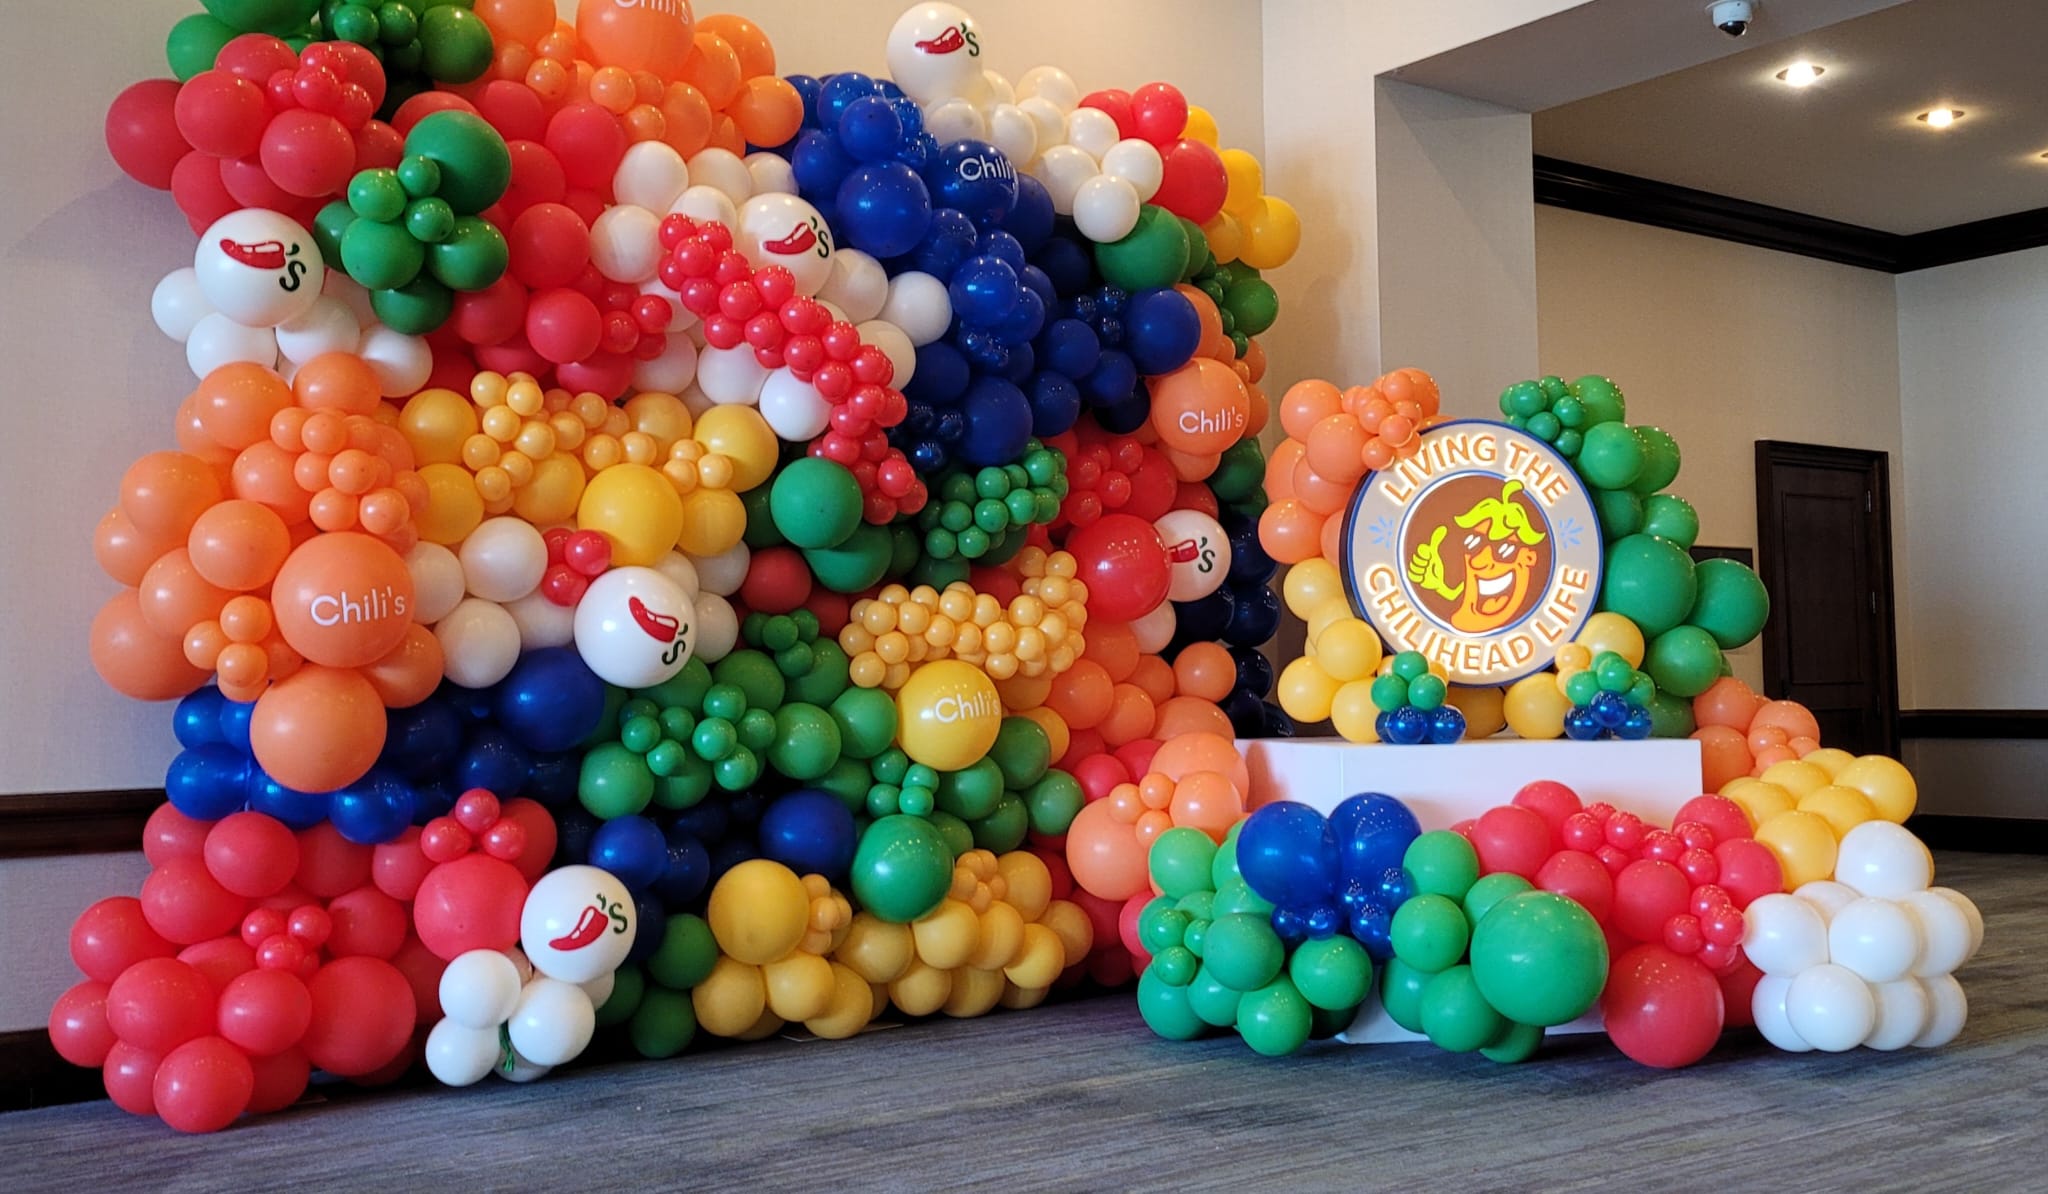 A sophisticated balloon wall designed for corporate events, showcasing professionalism and creativity in event planning